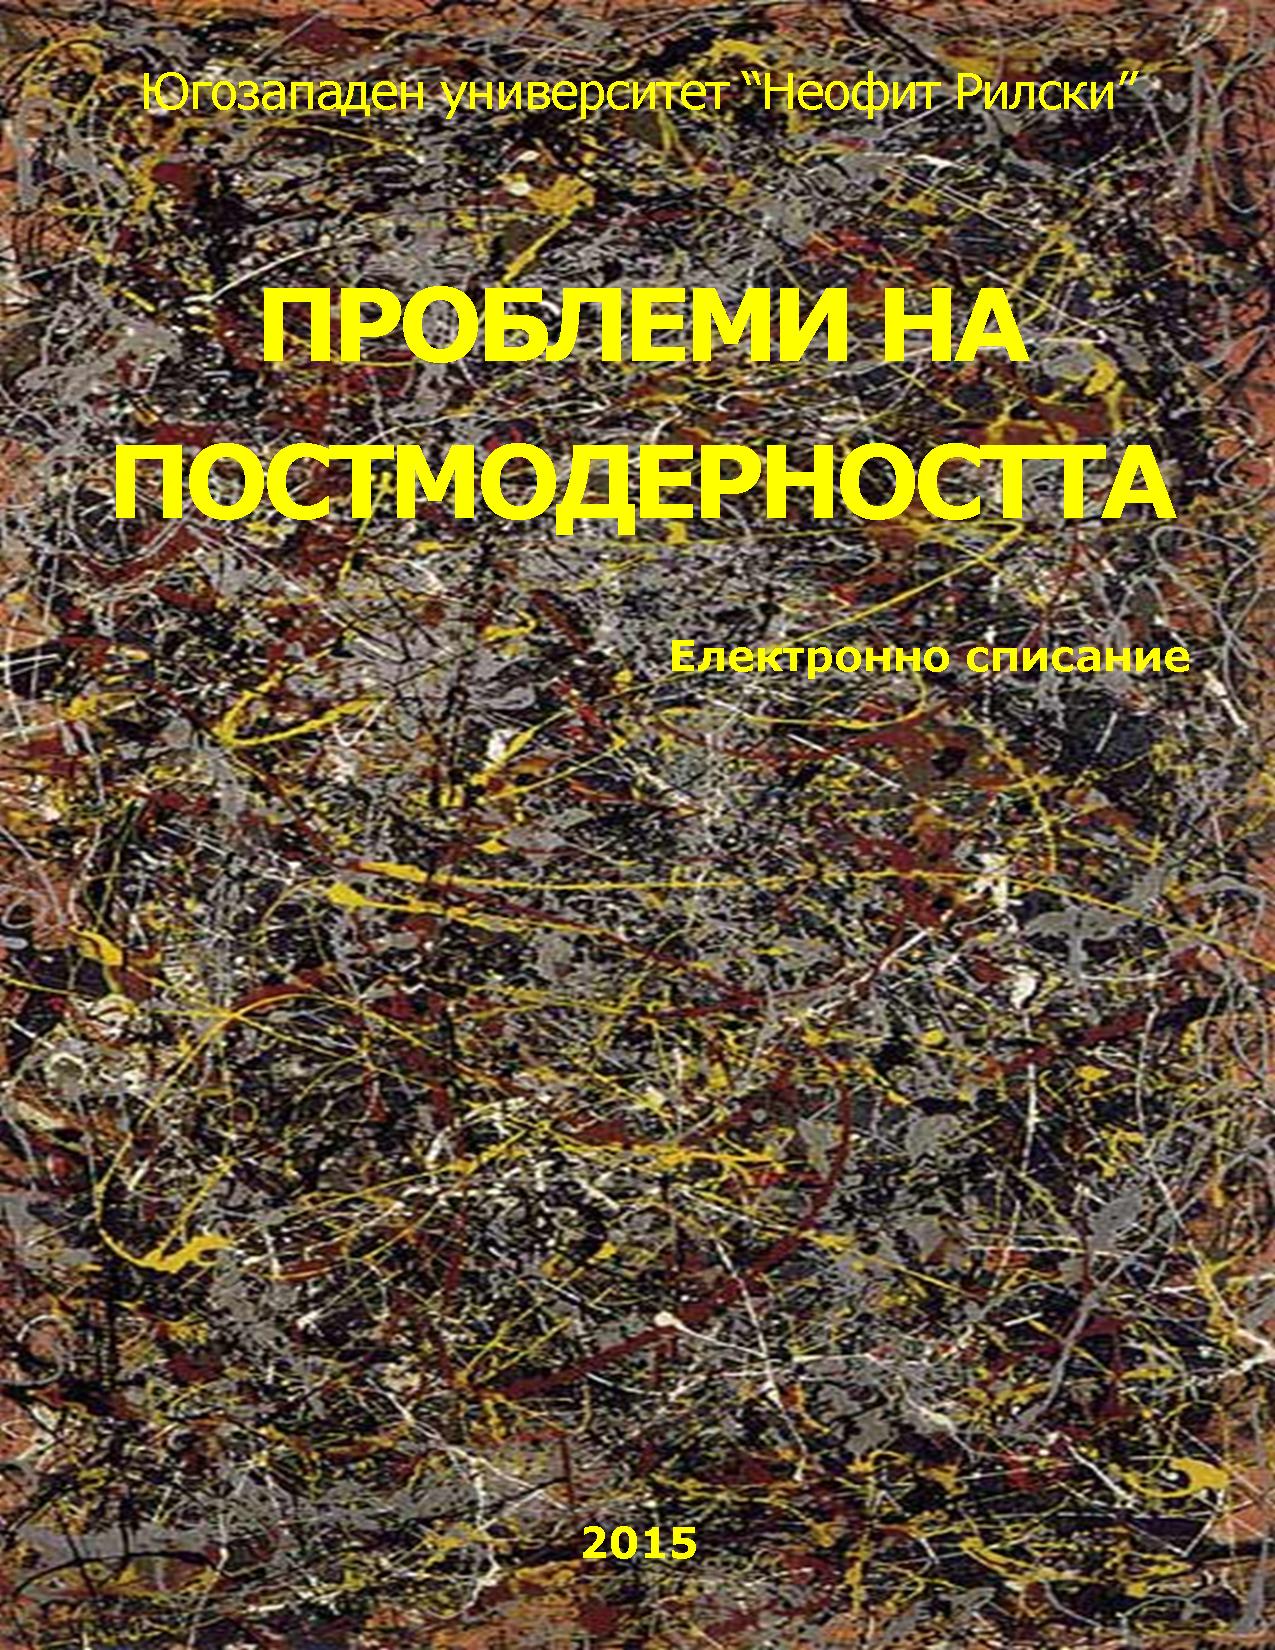 A vision towards empirical data: Values in education a comparative analysis of focus groups and in-depth interviews in three Bulgarian universities Cover Image